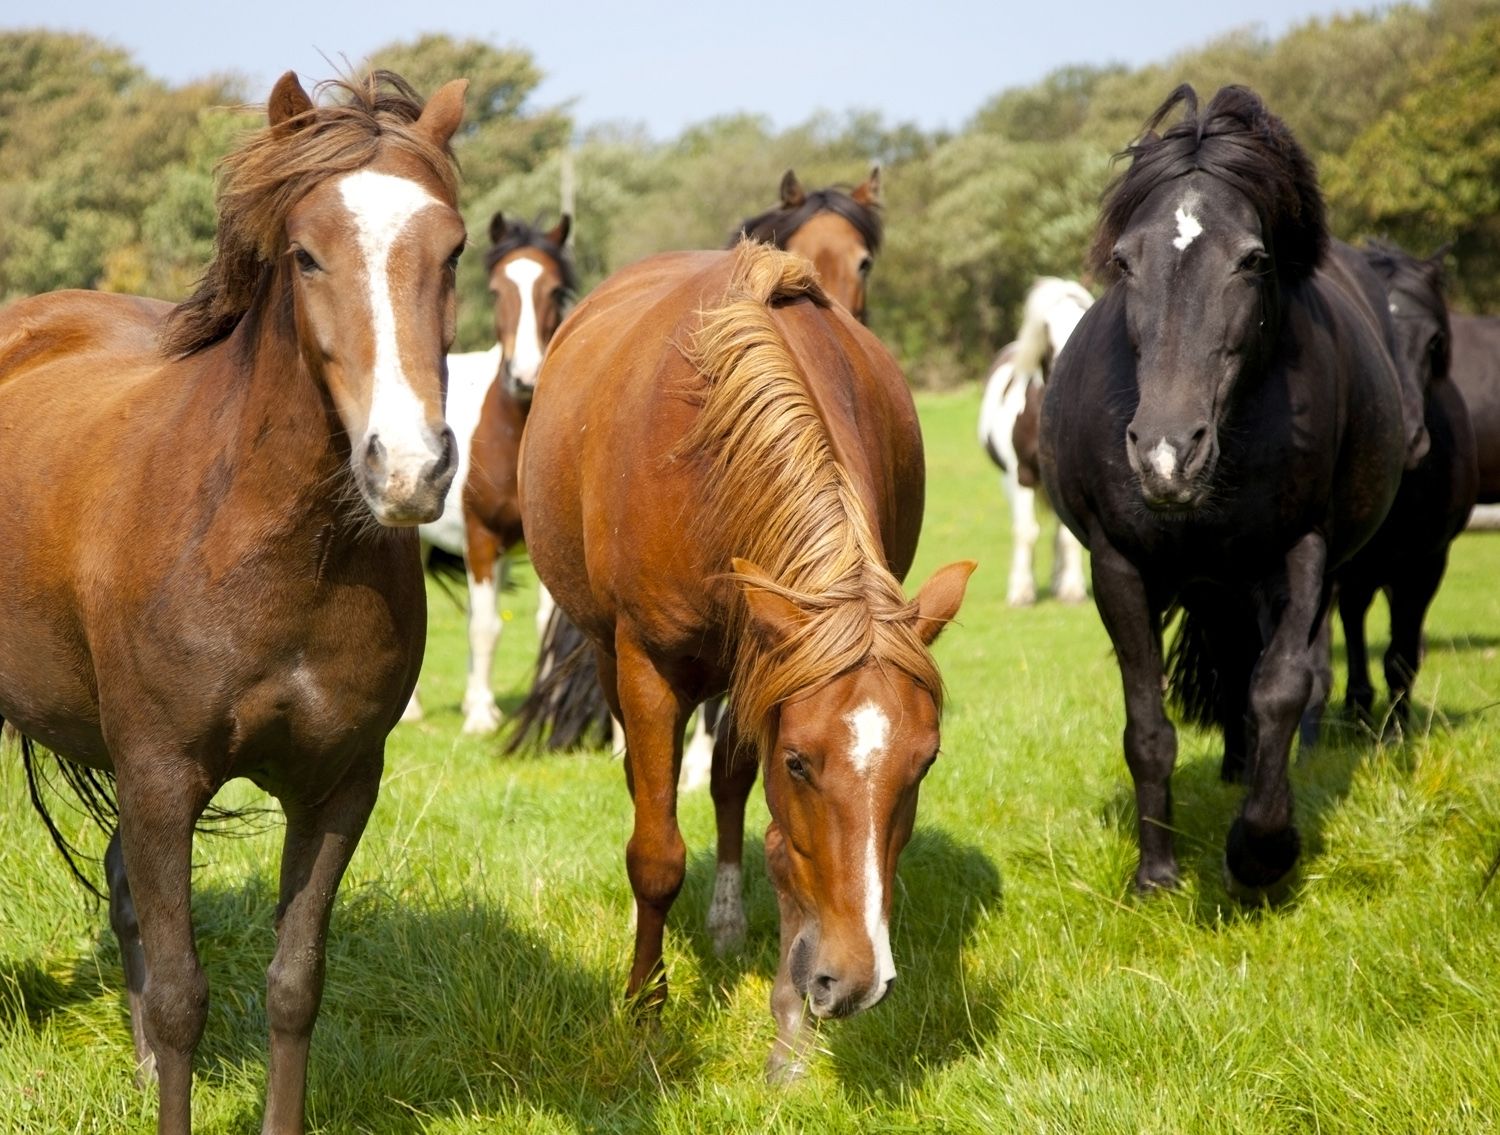 A group of horses with electric fencing.